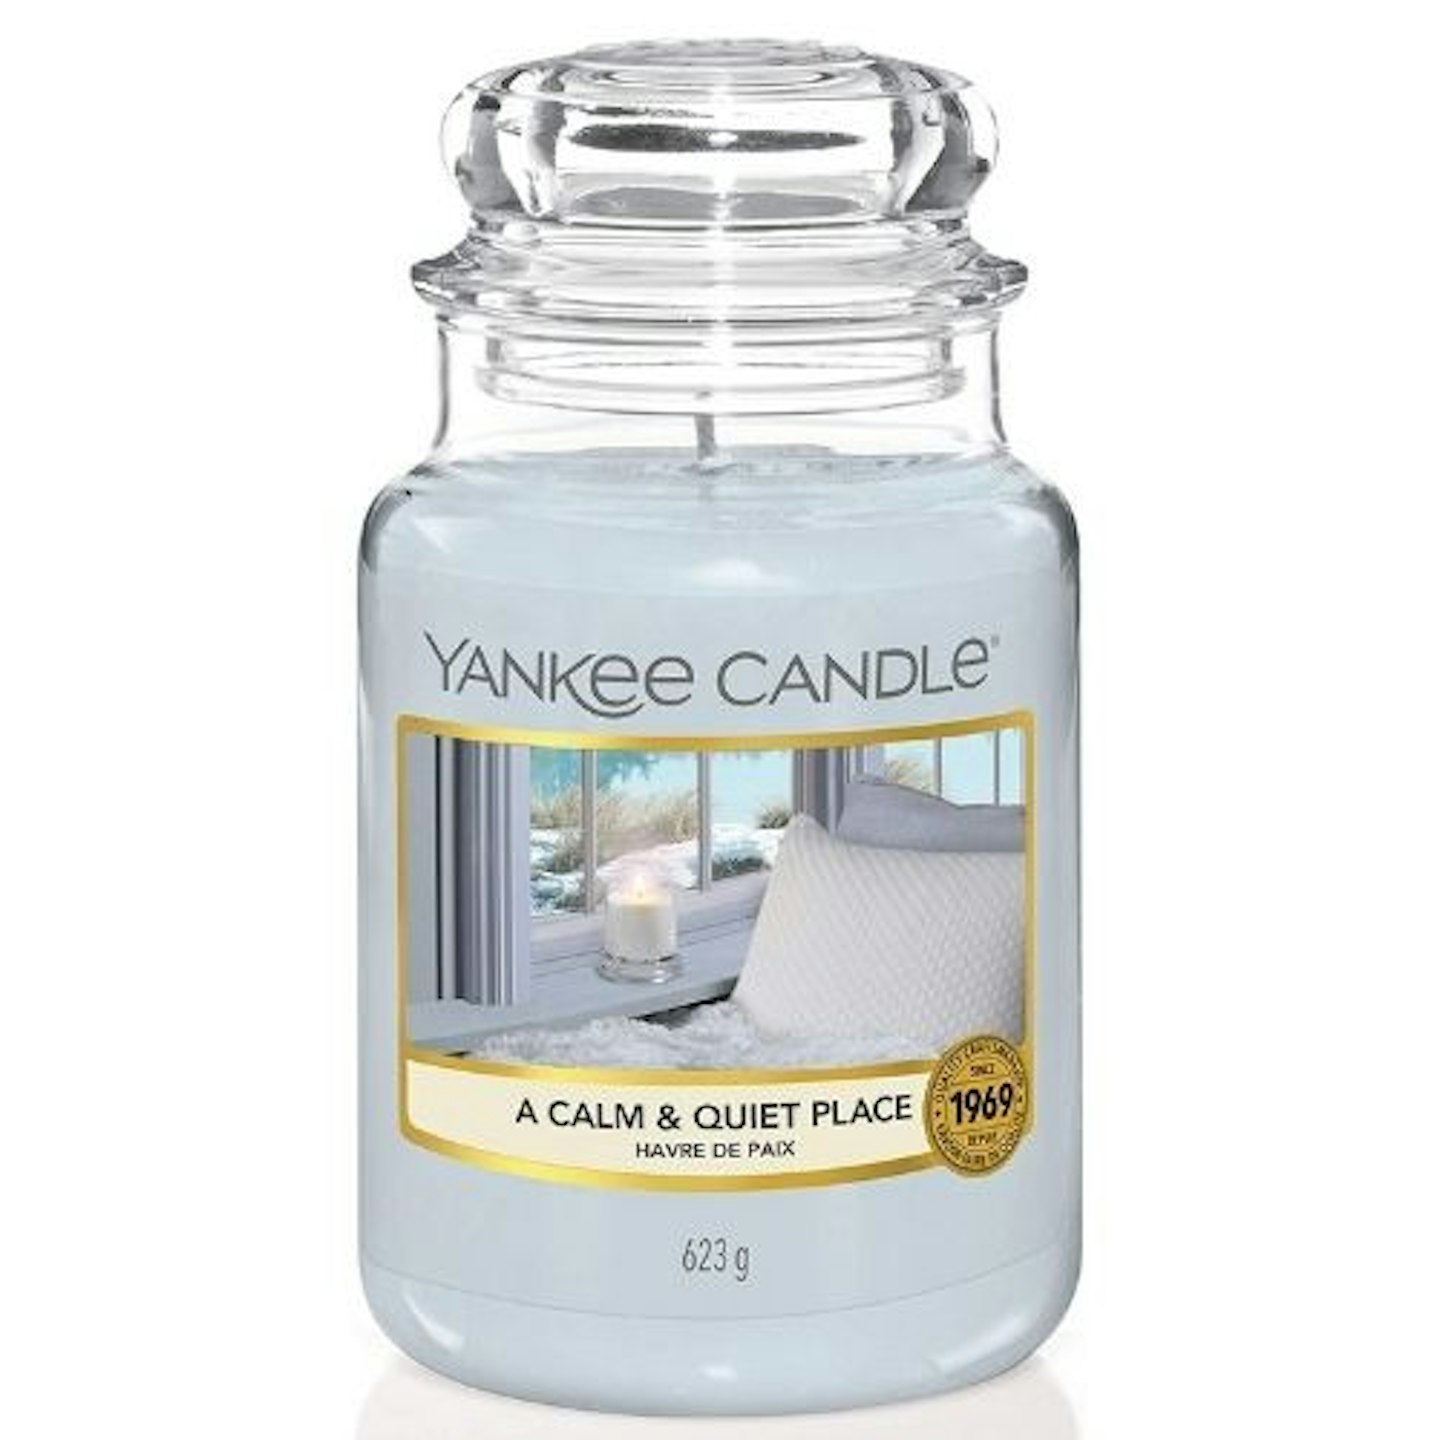 A Calm and Quiet Place Large Jar Candle